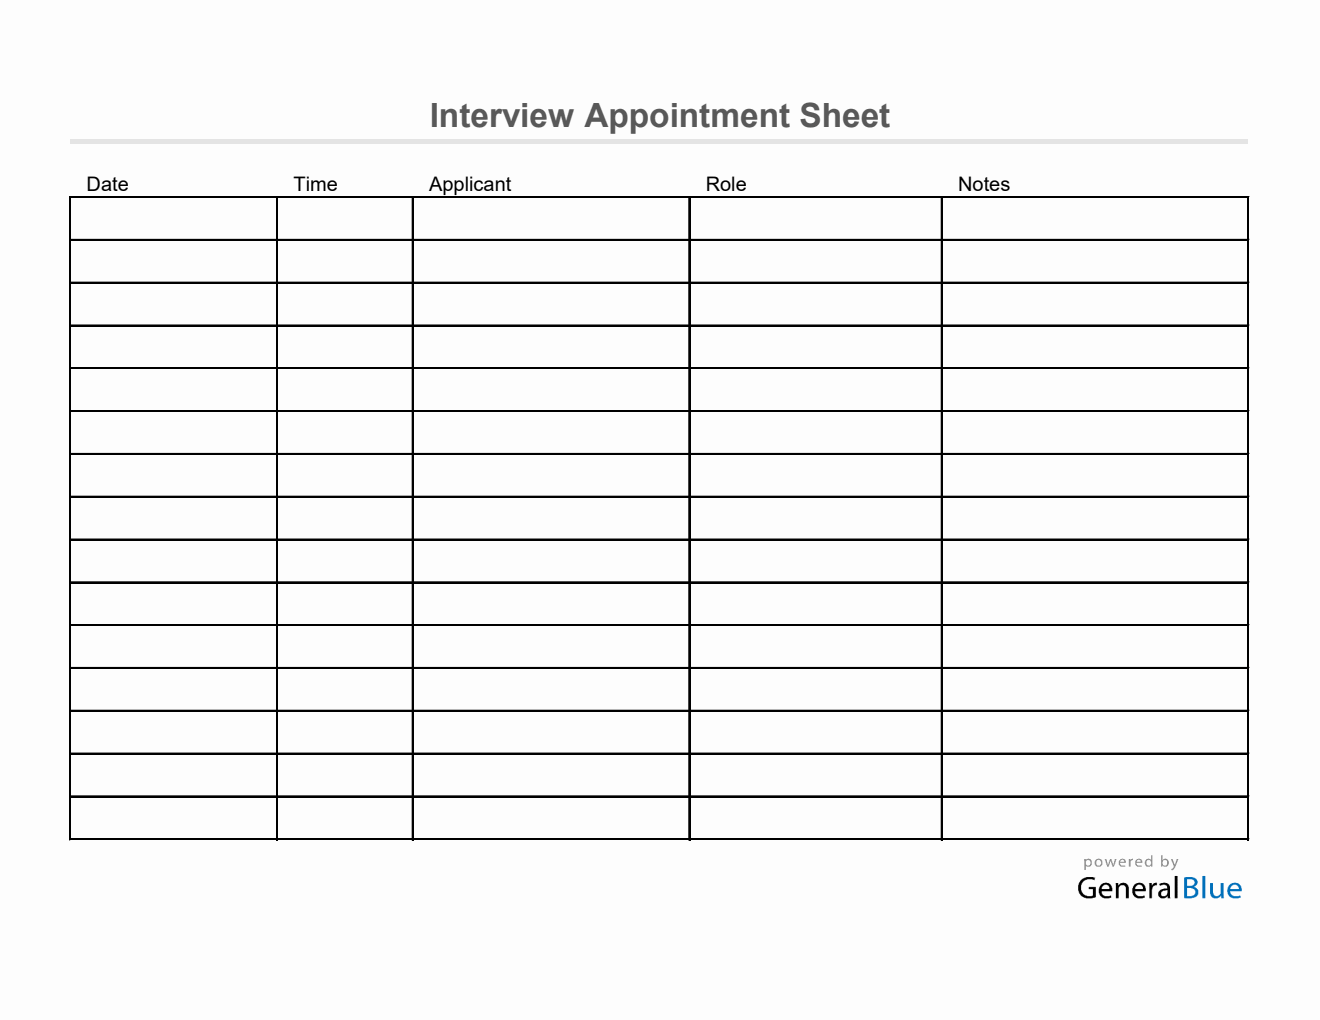 Interview Appointment Sheet Template in Excel (Basic)